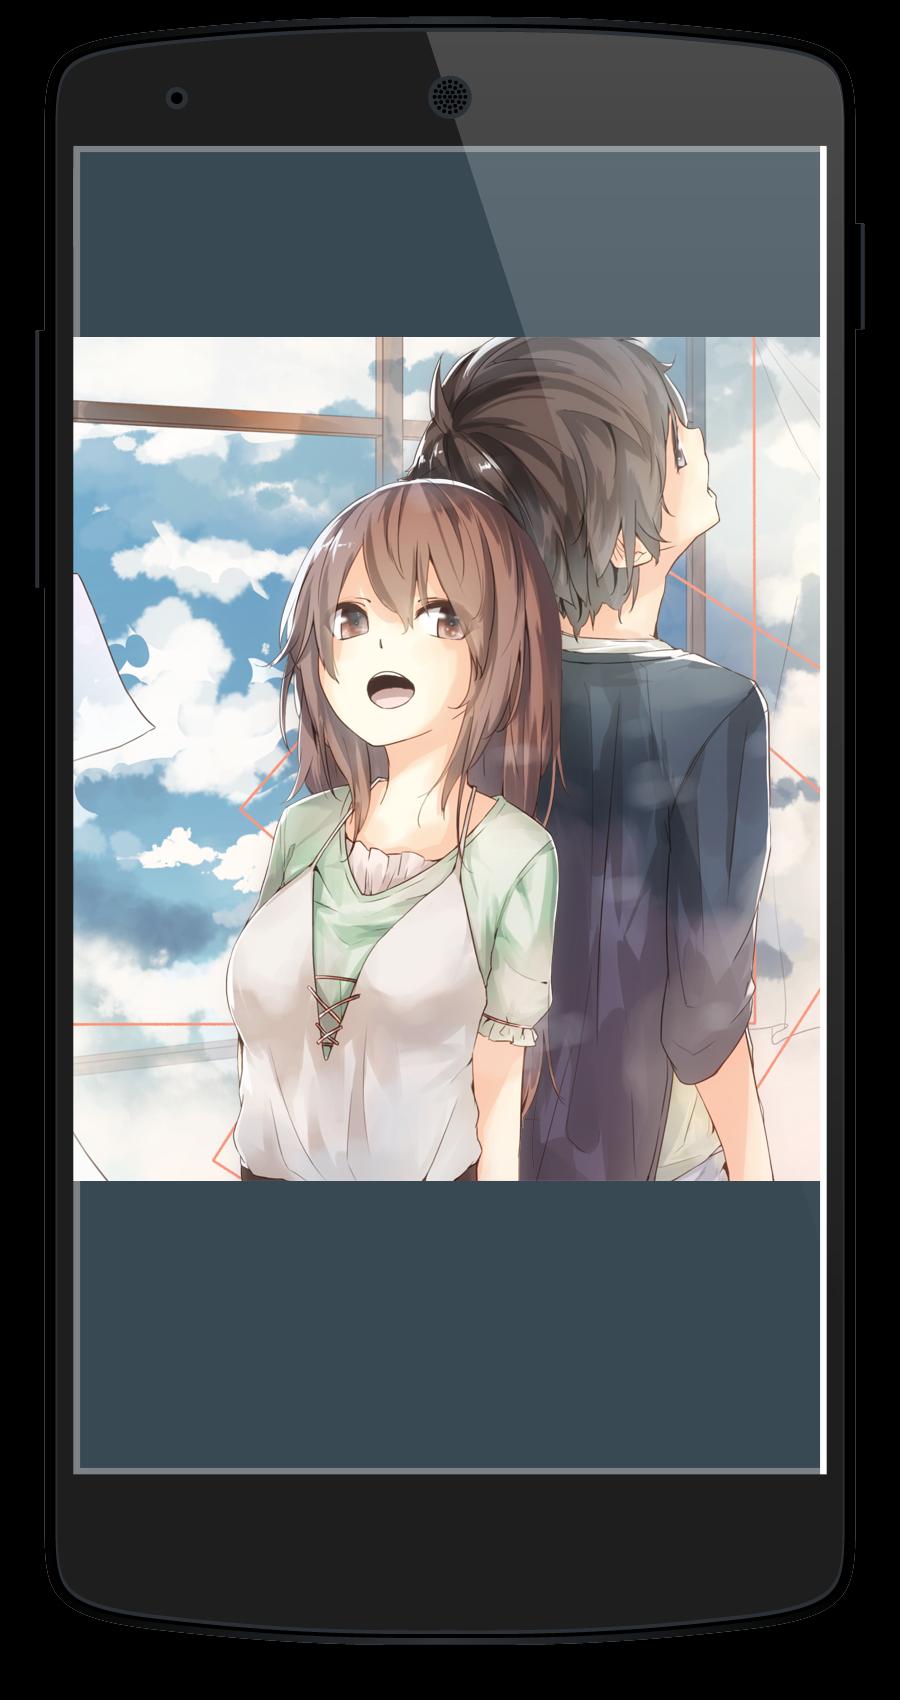 Anime Romance Wallpaper For Android APK Download